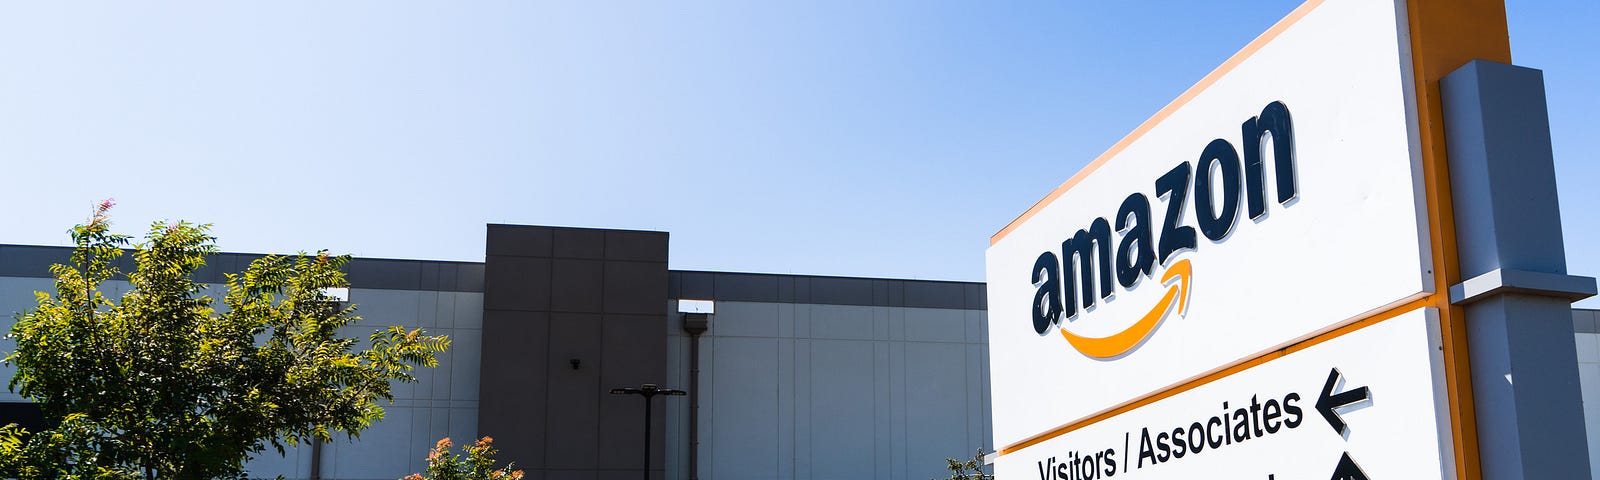 An Amazon Fulfillment Center sign and building located in Sacramento, CA.